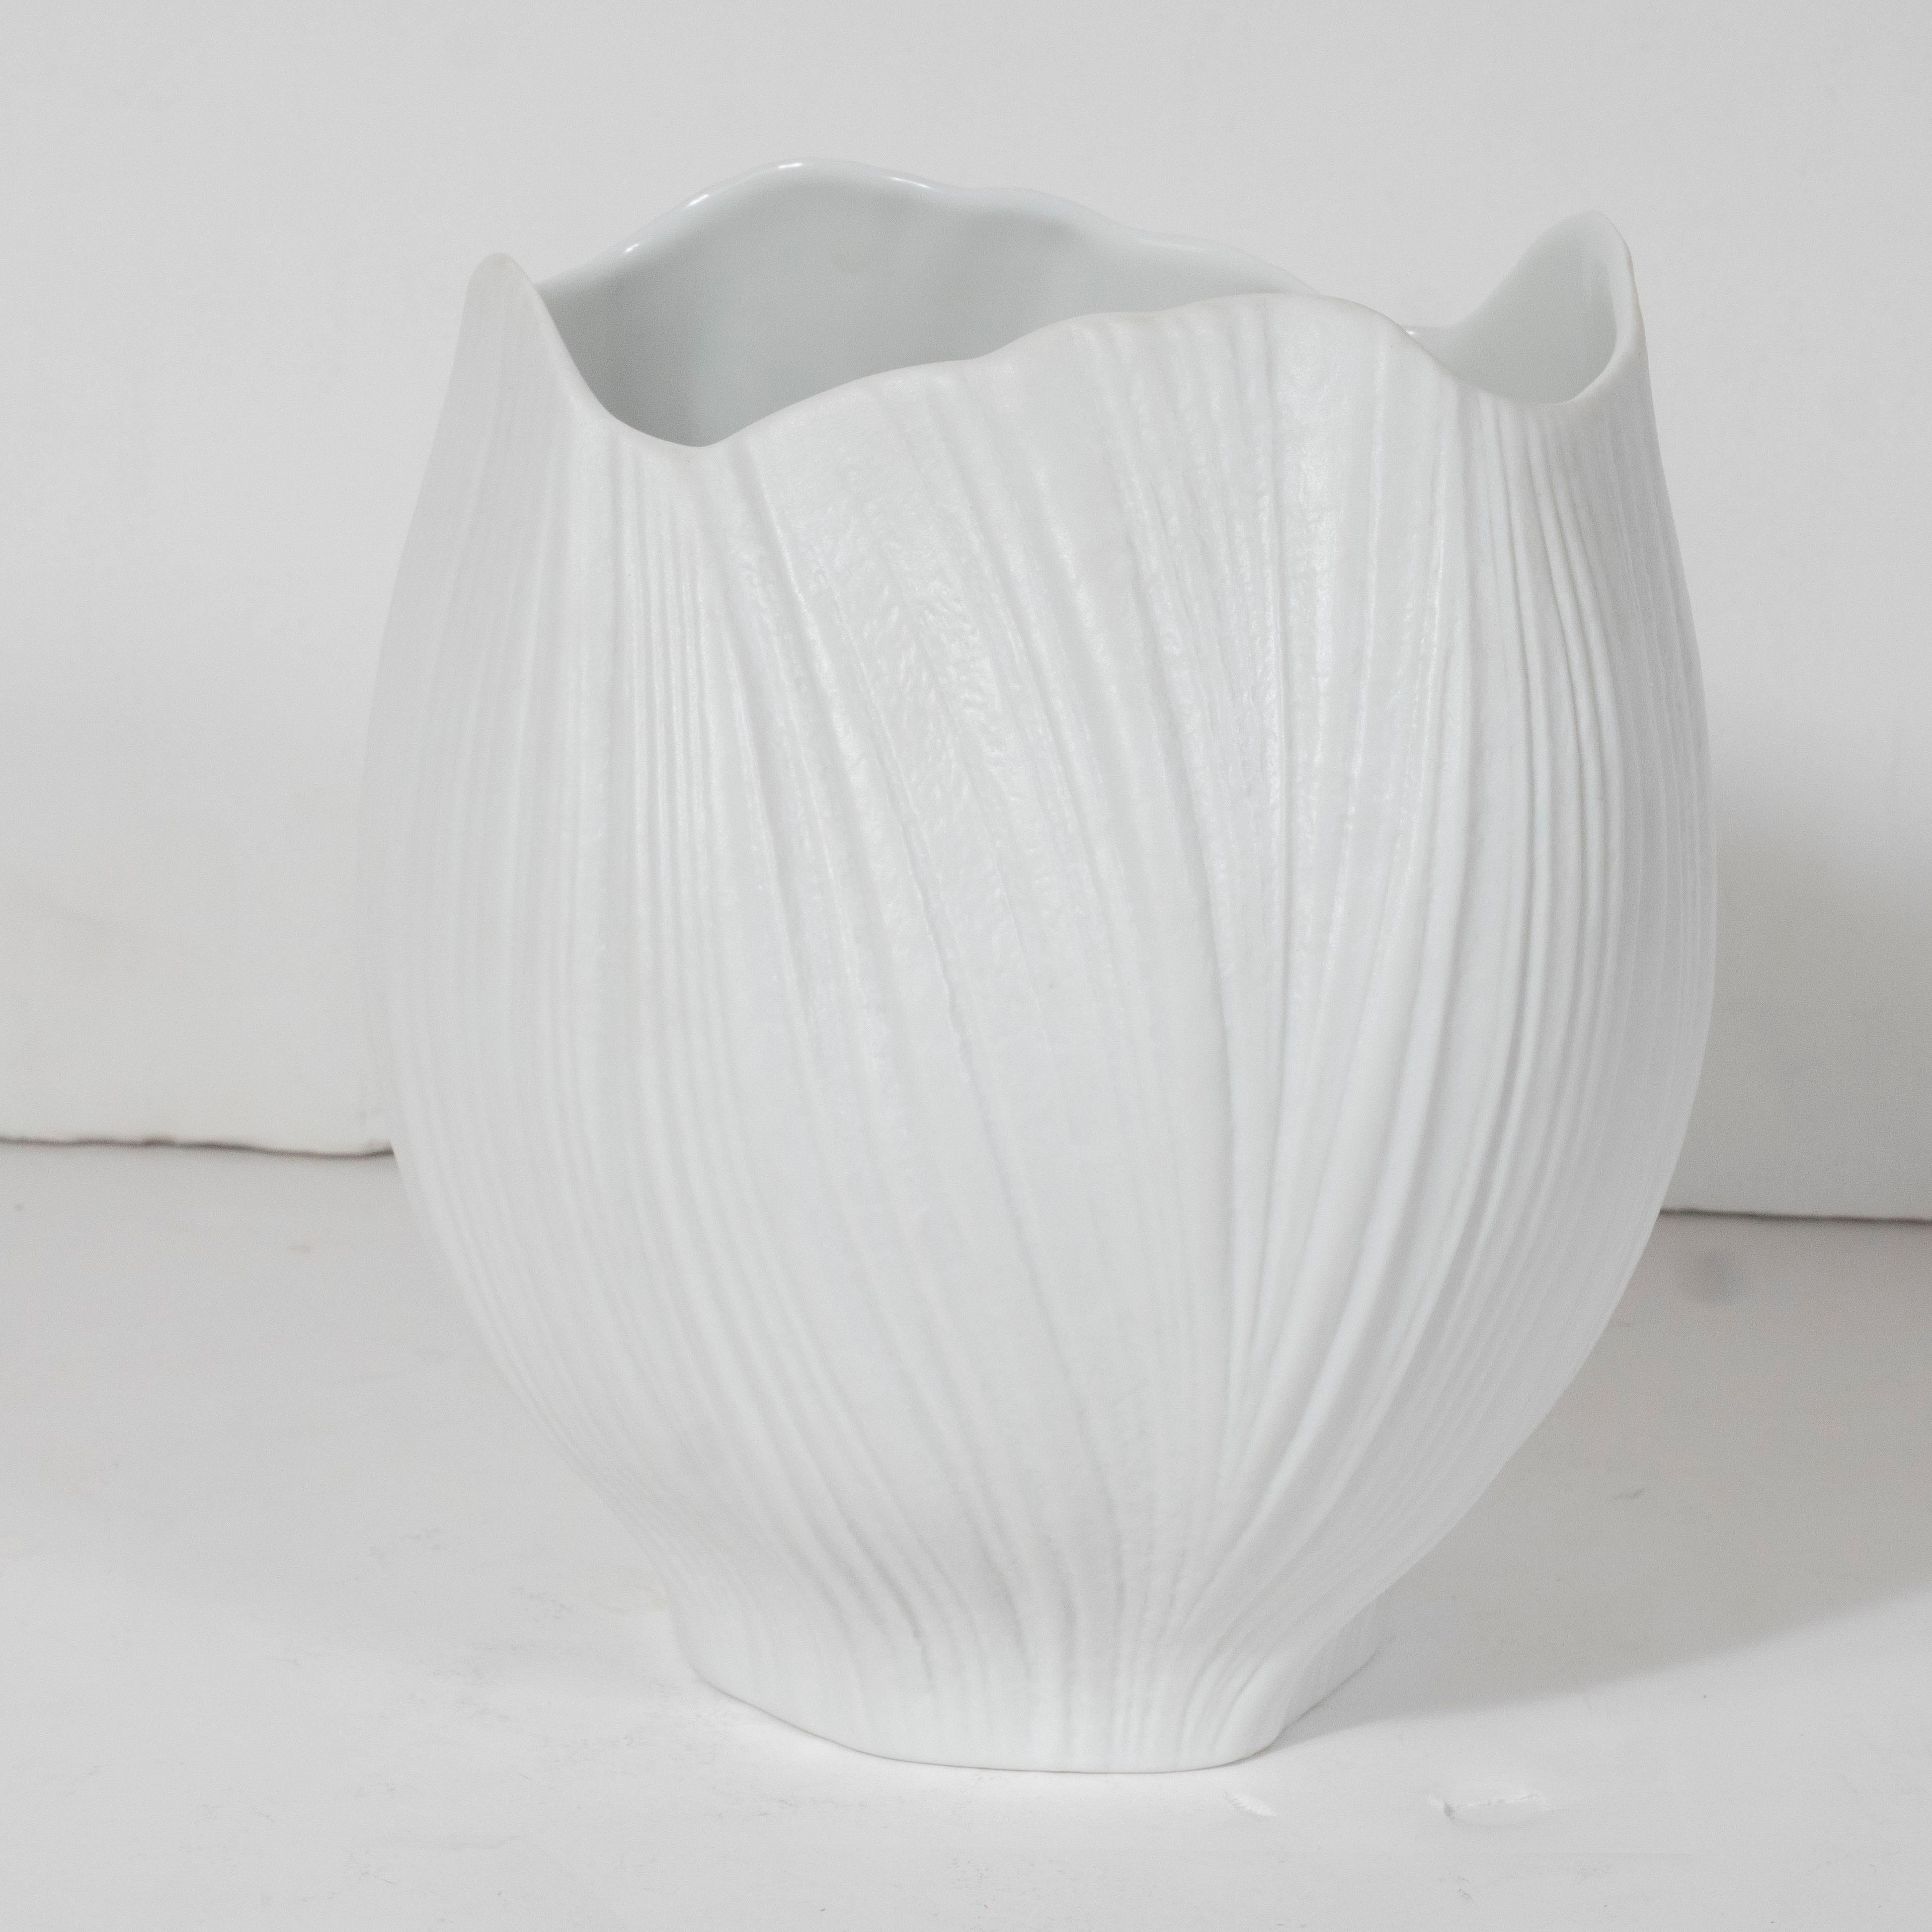 This stunning Mid-Century Modern vase was designed by Martin Freyer for Rosenthal circa 1980. It features an organic and sculptural form- full of verve and subtle movement- realized in striated white ceramic. With its beautiful quality and clean